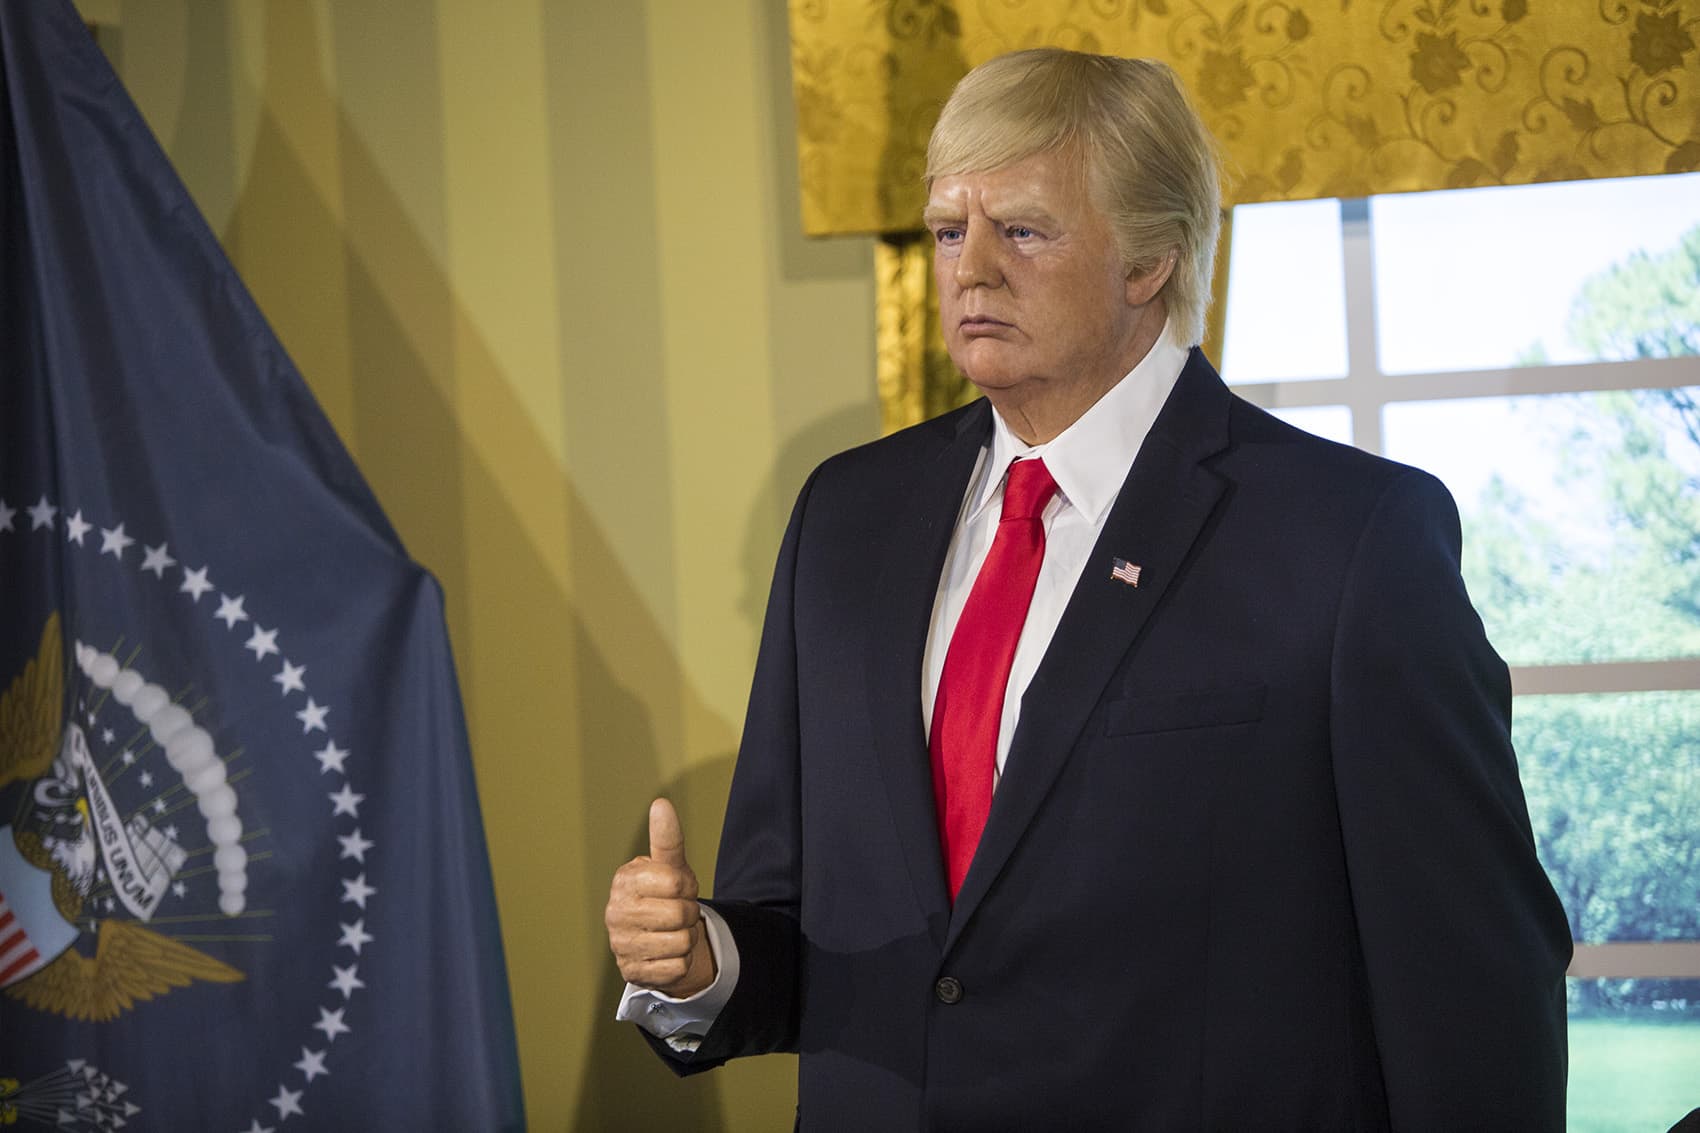 Boston's Dreamland Wax Museum features a wax figure of President Trump in the Oval Office. (Jesse Costa/WBUR)